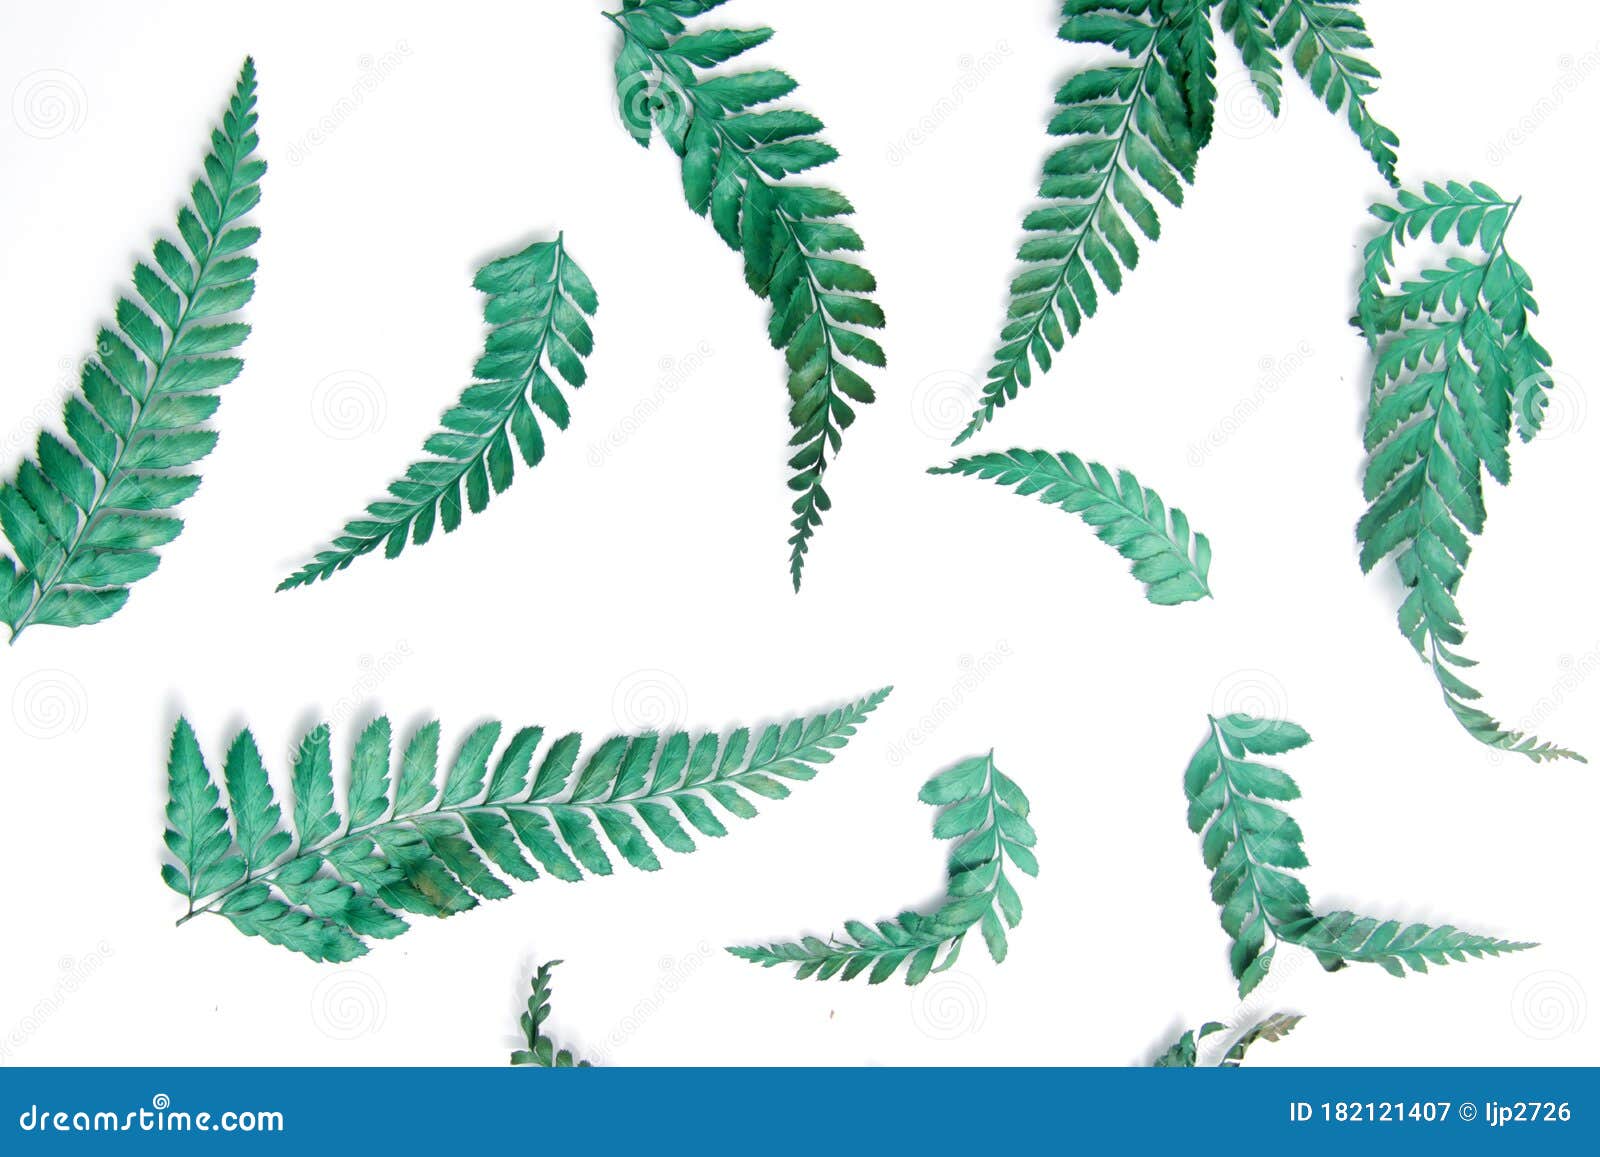 close up shot of common lady-fern